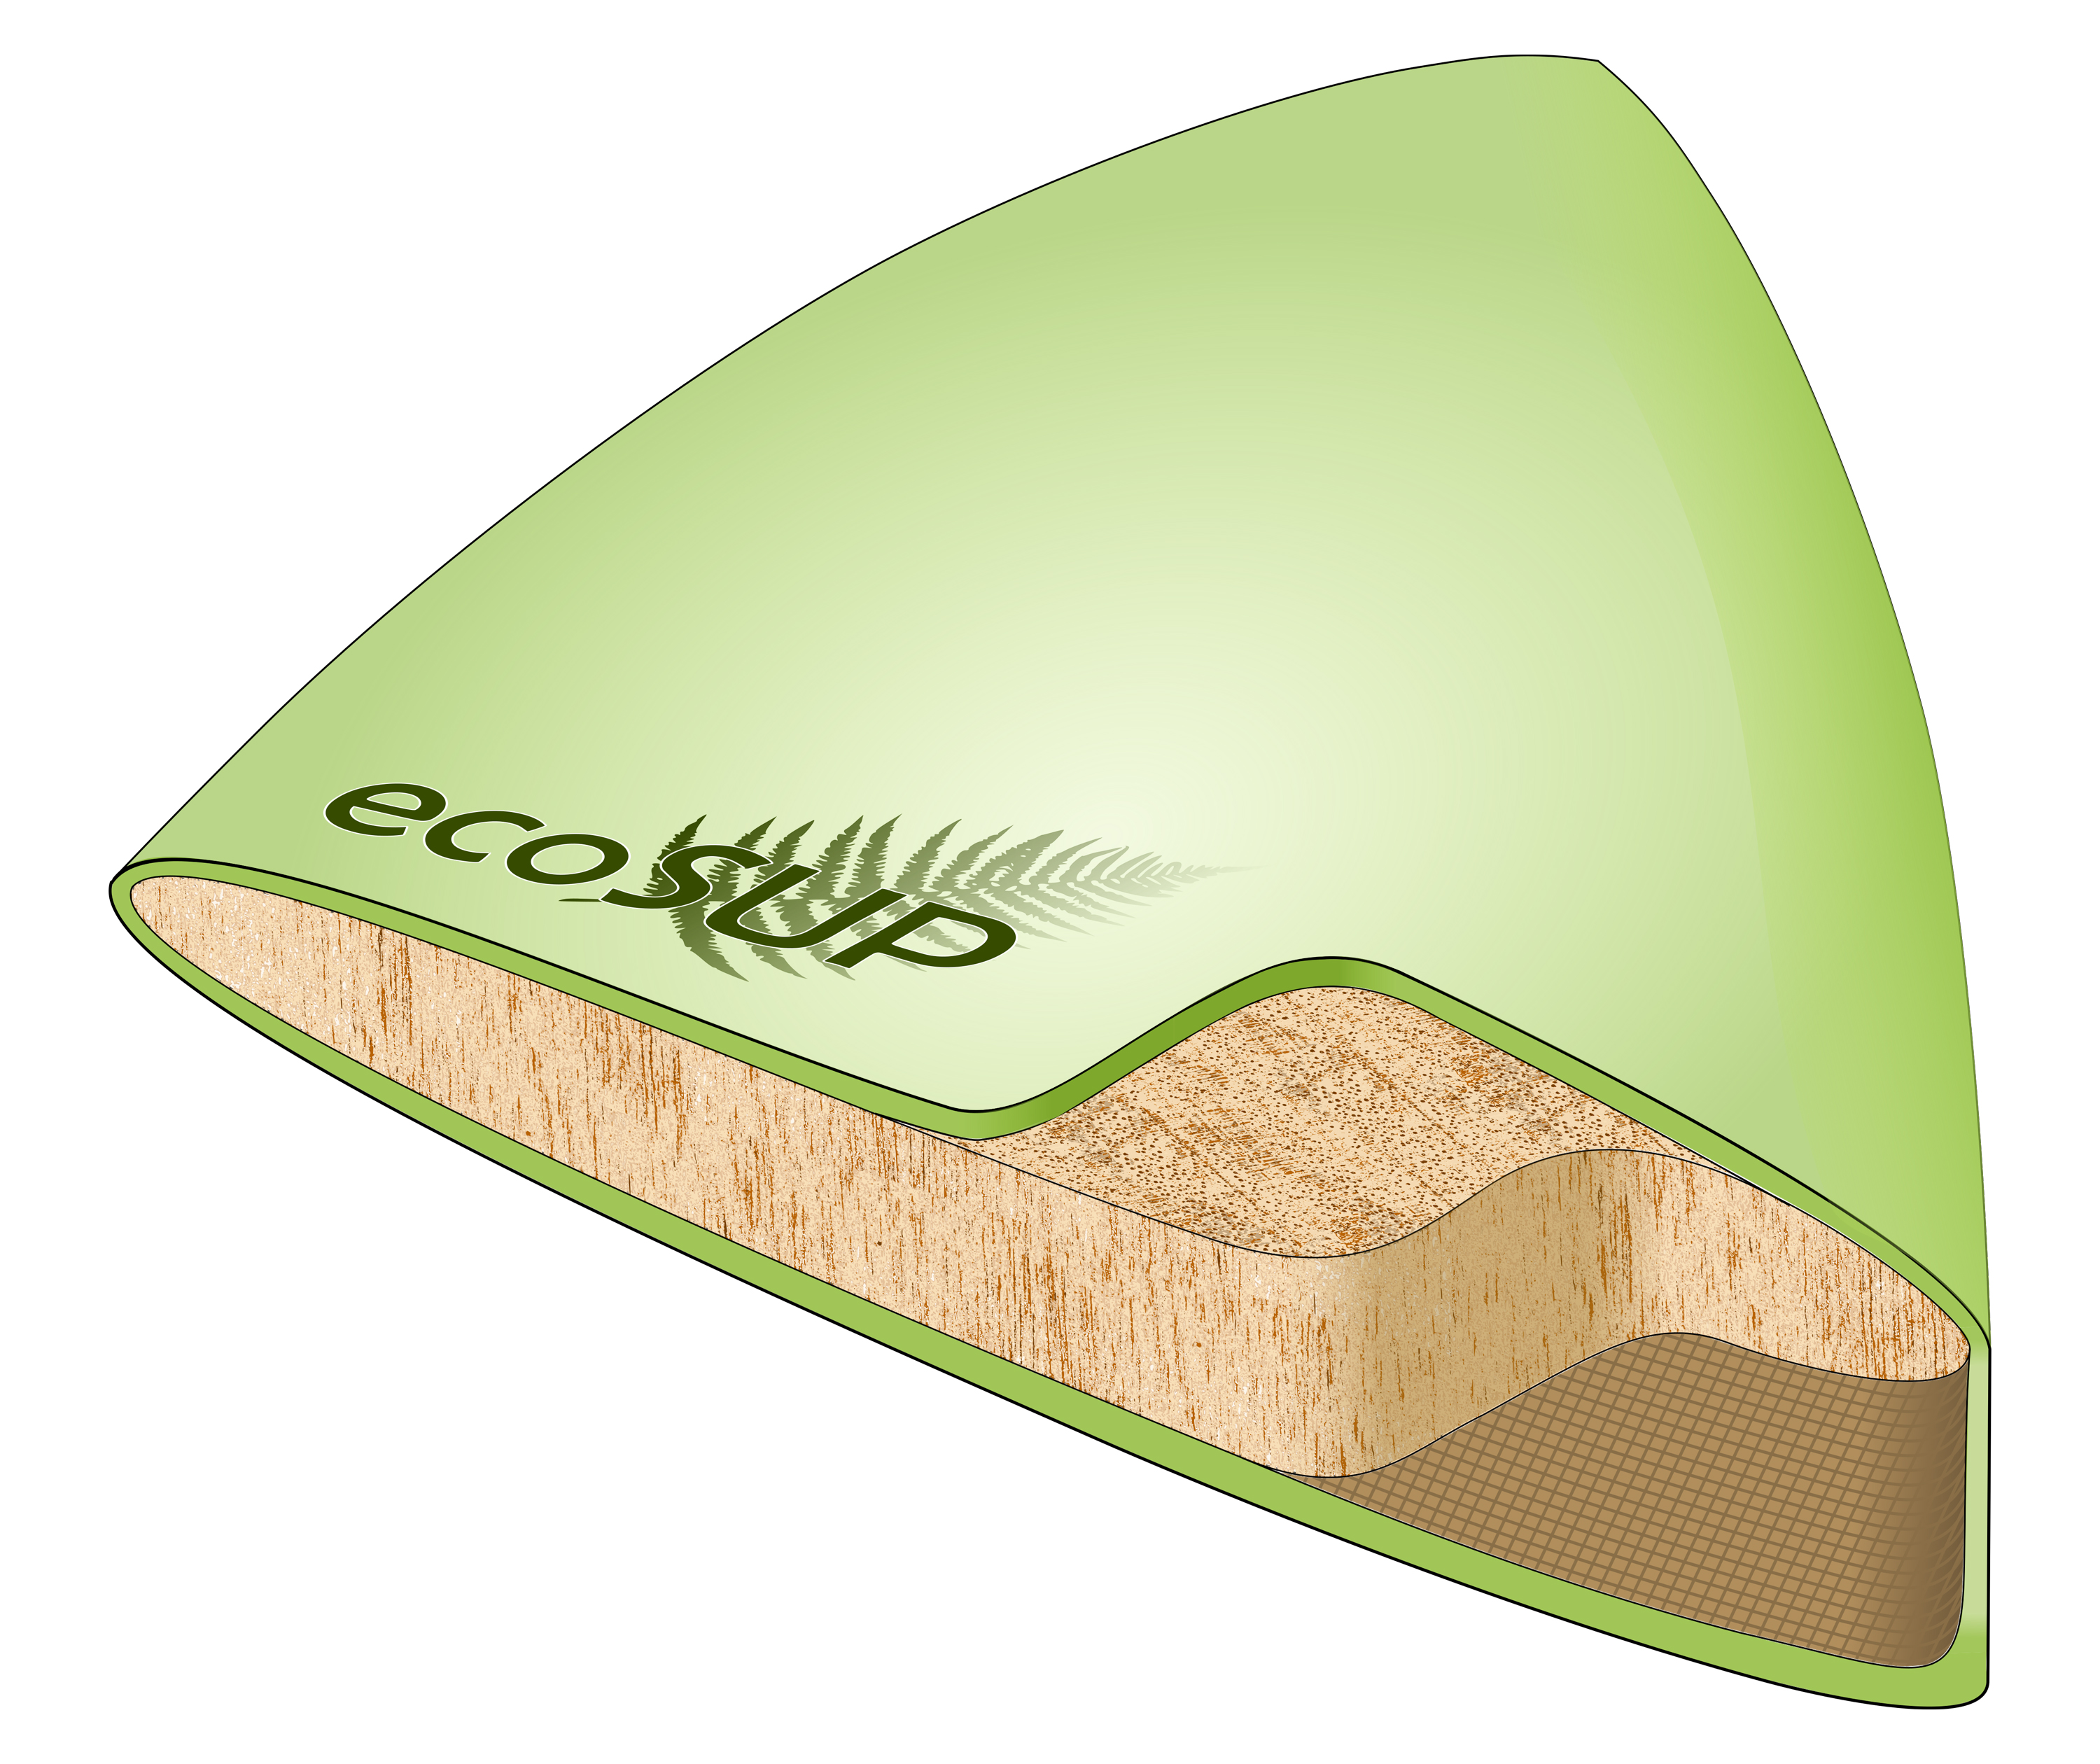 The 3D computer graphic shows the cut-open hull of a stand-up paddleboard.